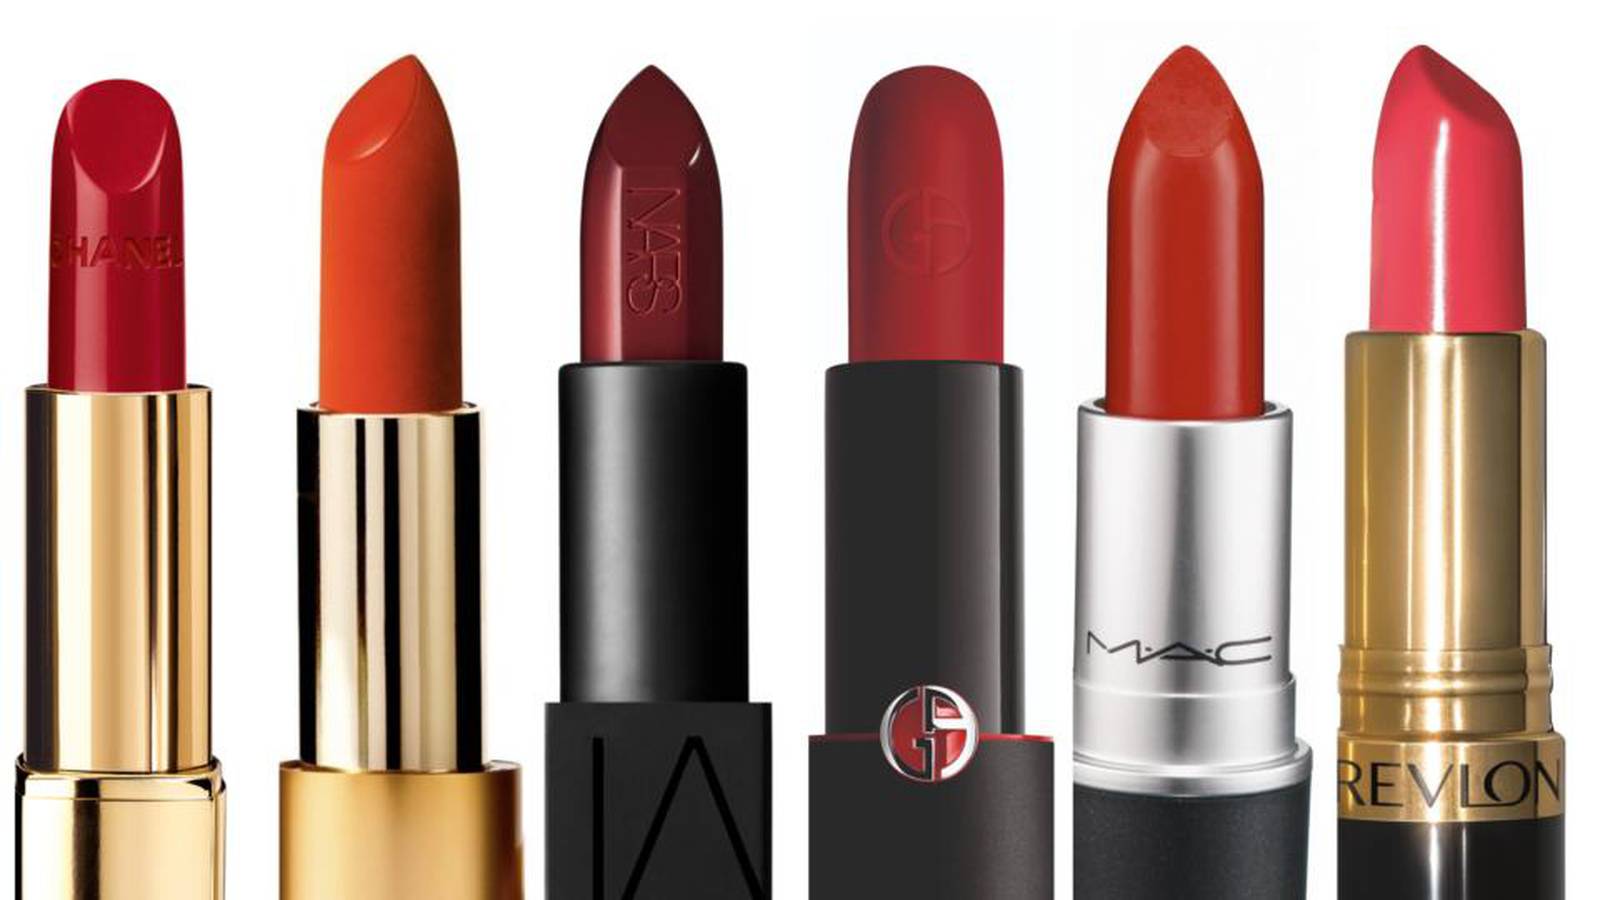 From Chanel to Revlon, the best red lipsticks of all time – The Irish